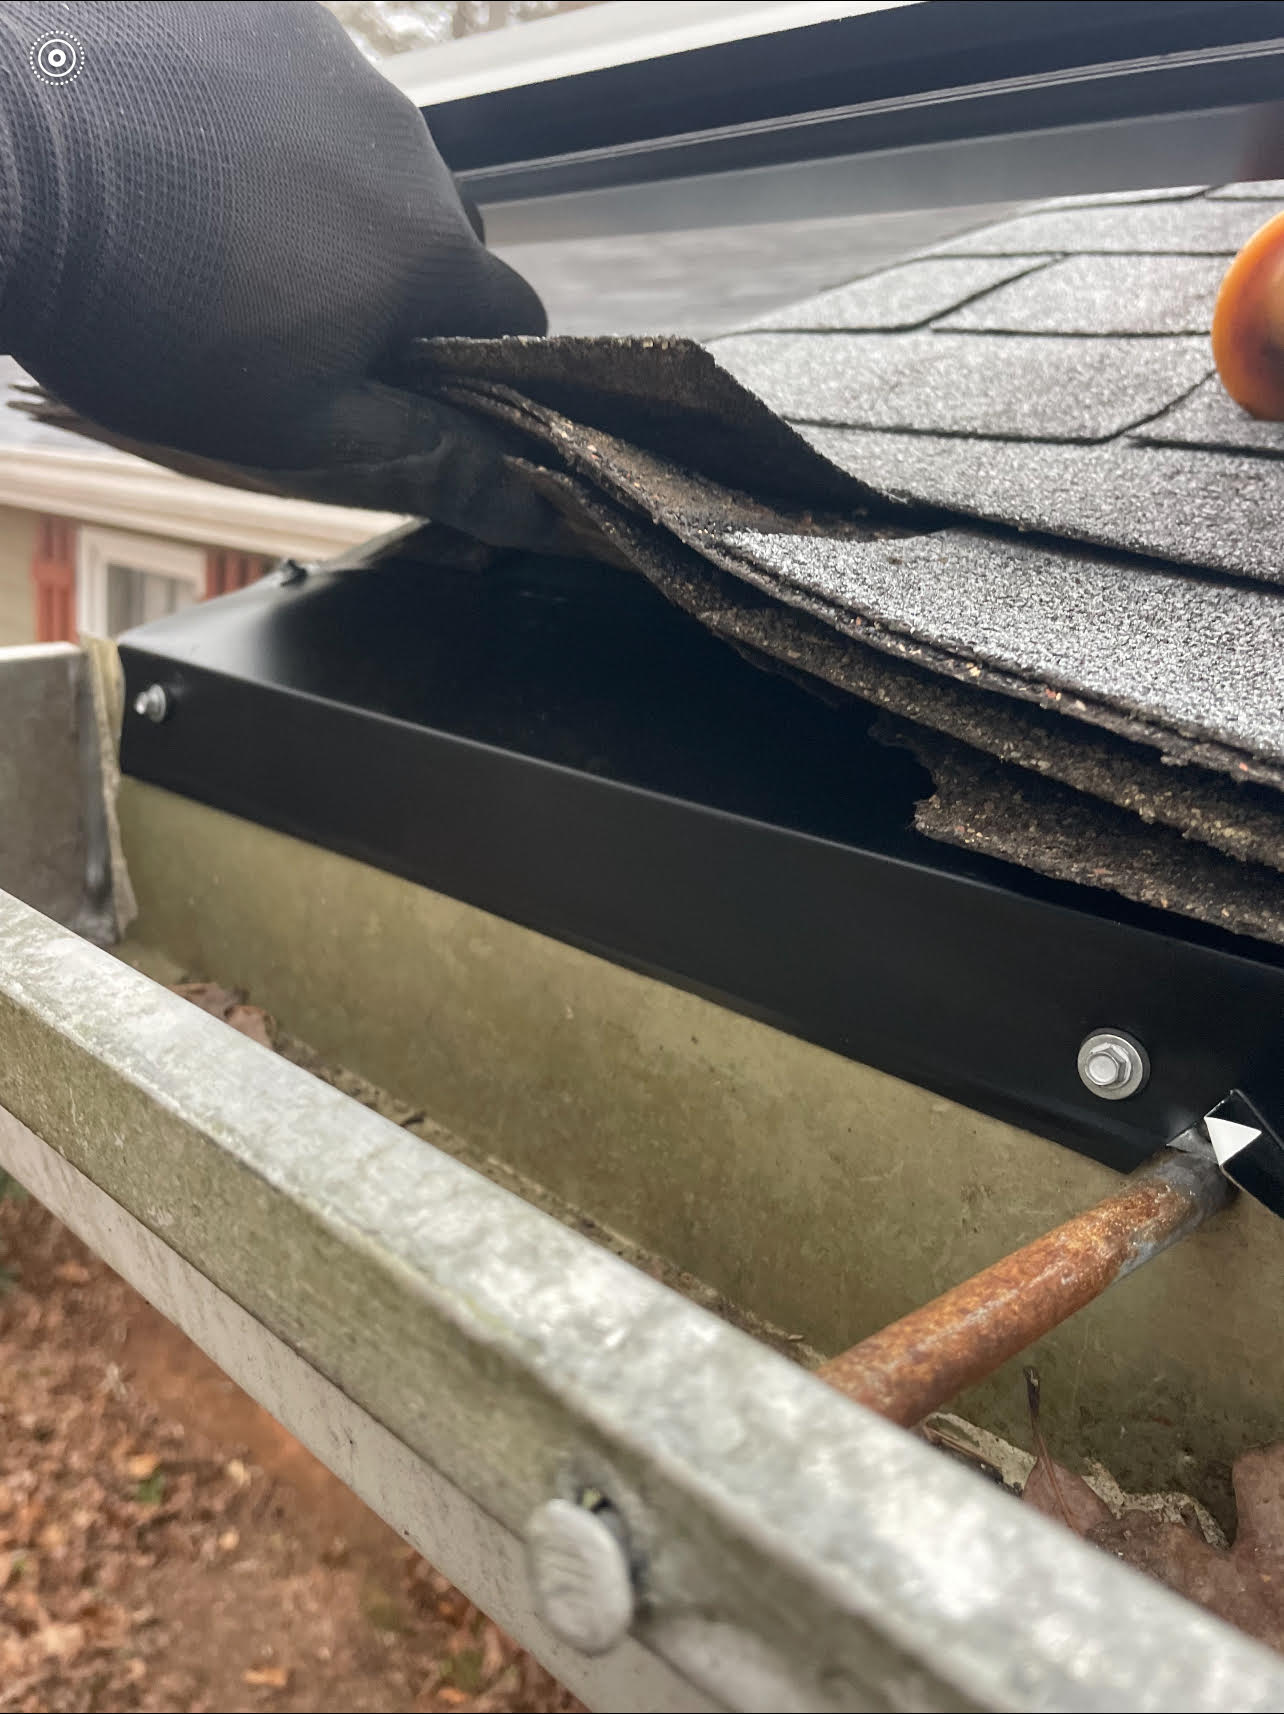 Metal used to seal roof gap to keep squirrels out of attic